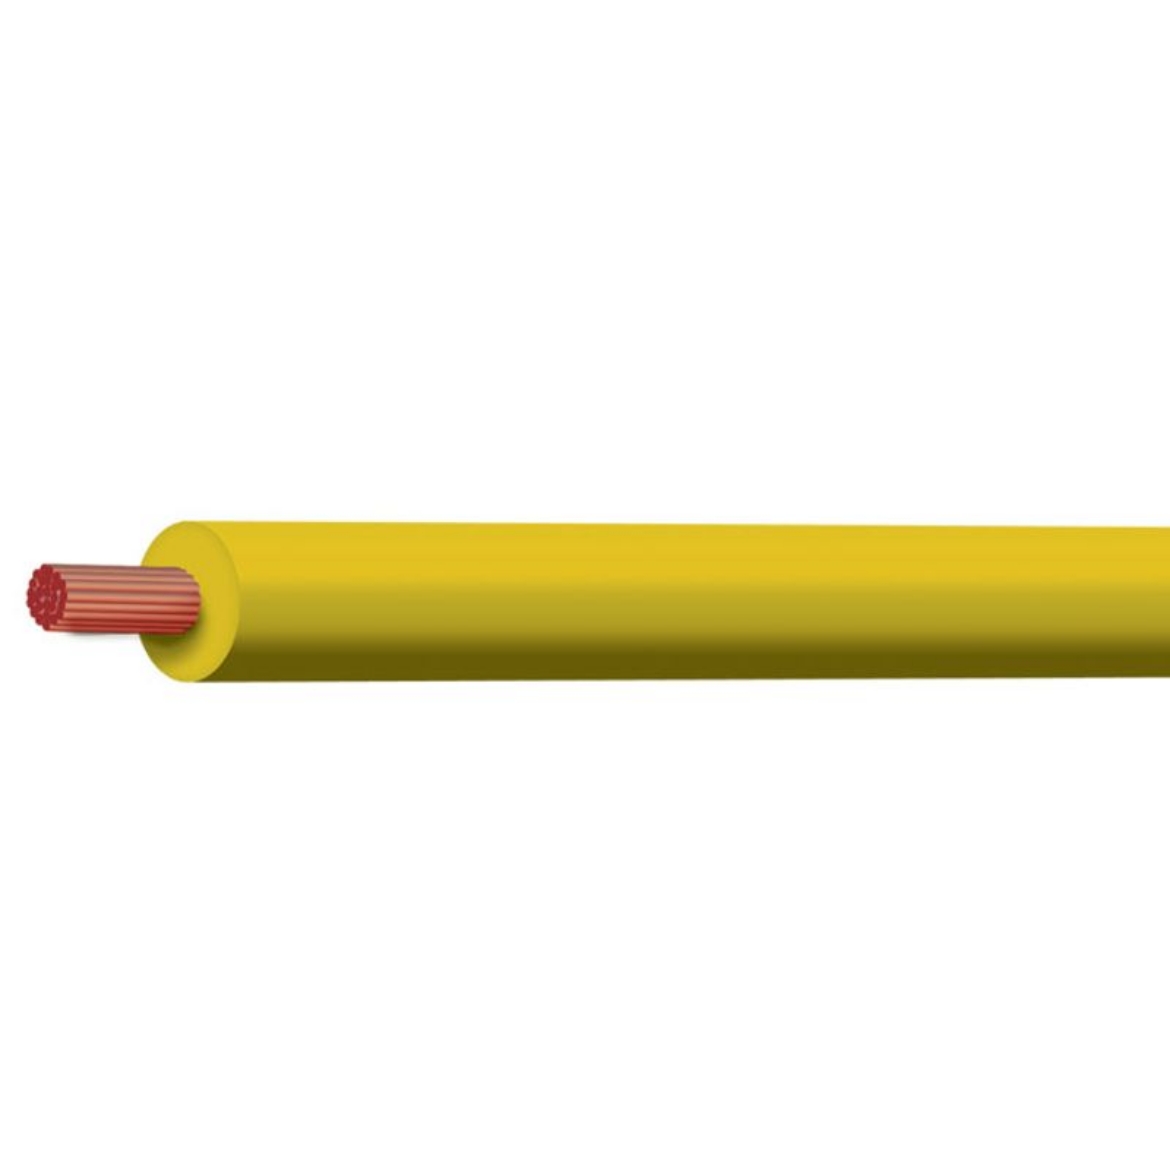 Picture of TYCAB 4MM SINGLE CORE CABLE 15A YELLOW - 30M ROLL